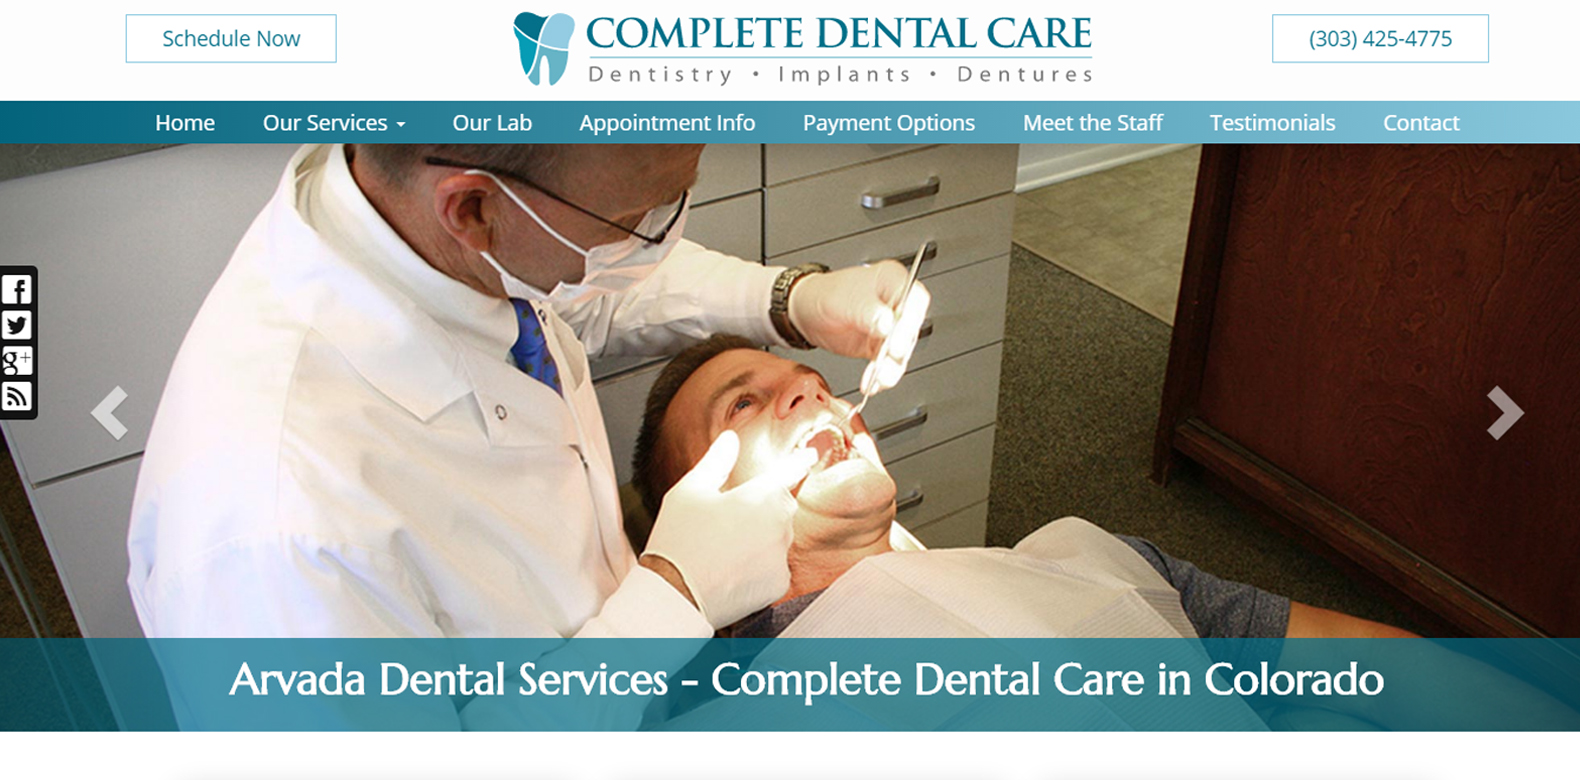 
New Website Launched: Complete Dental Care